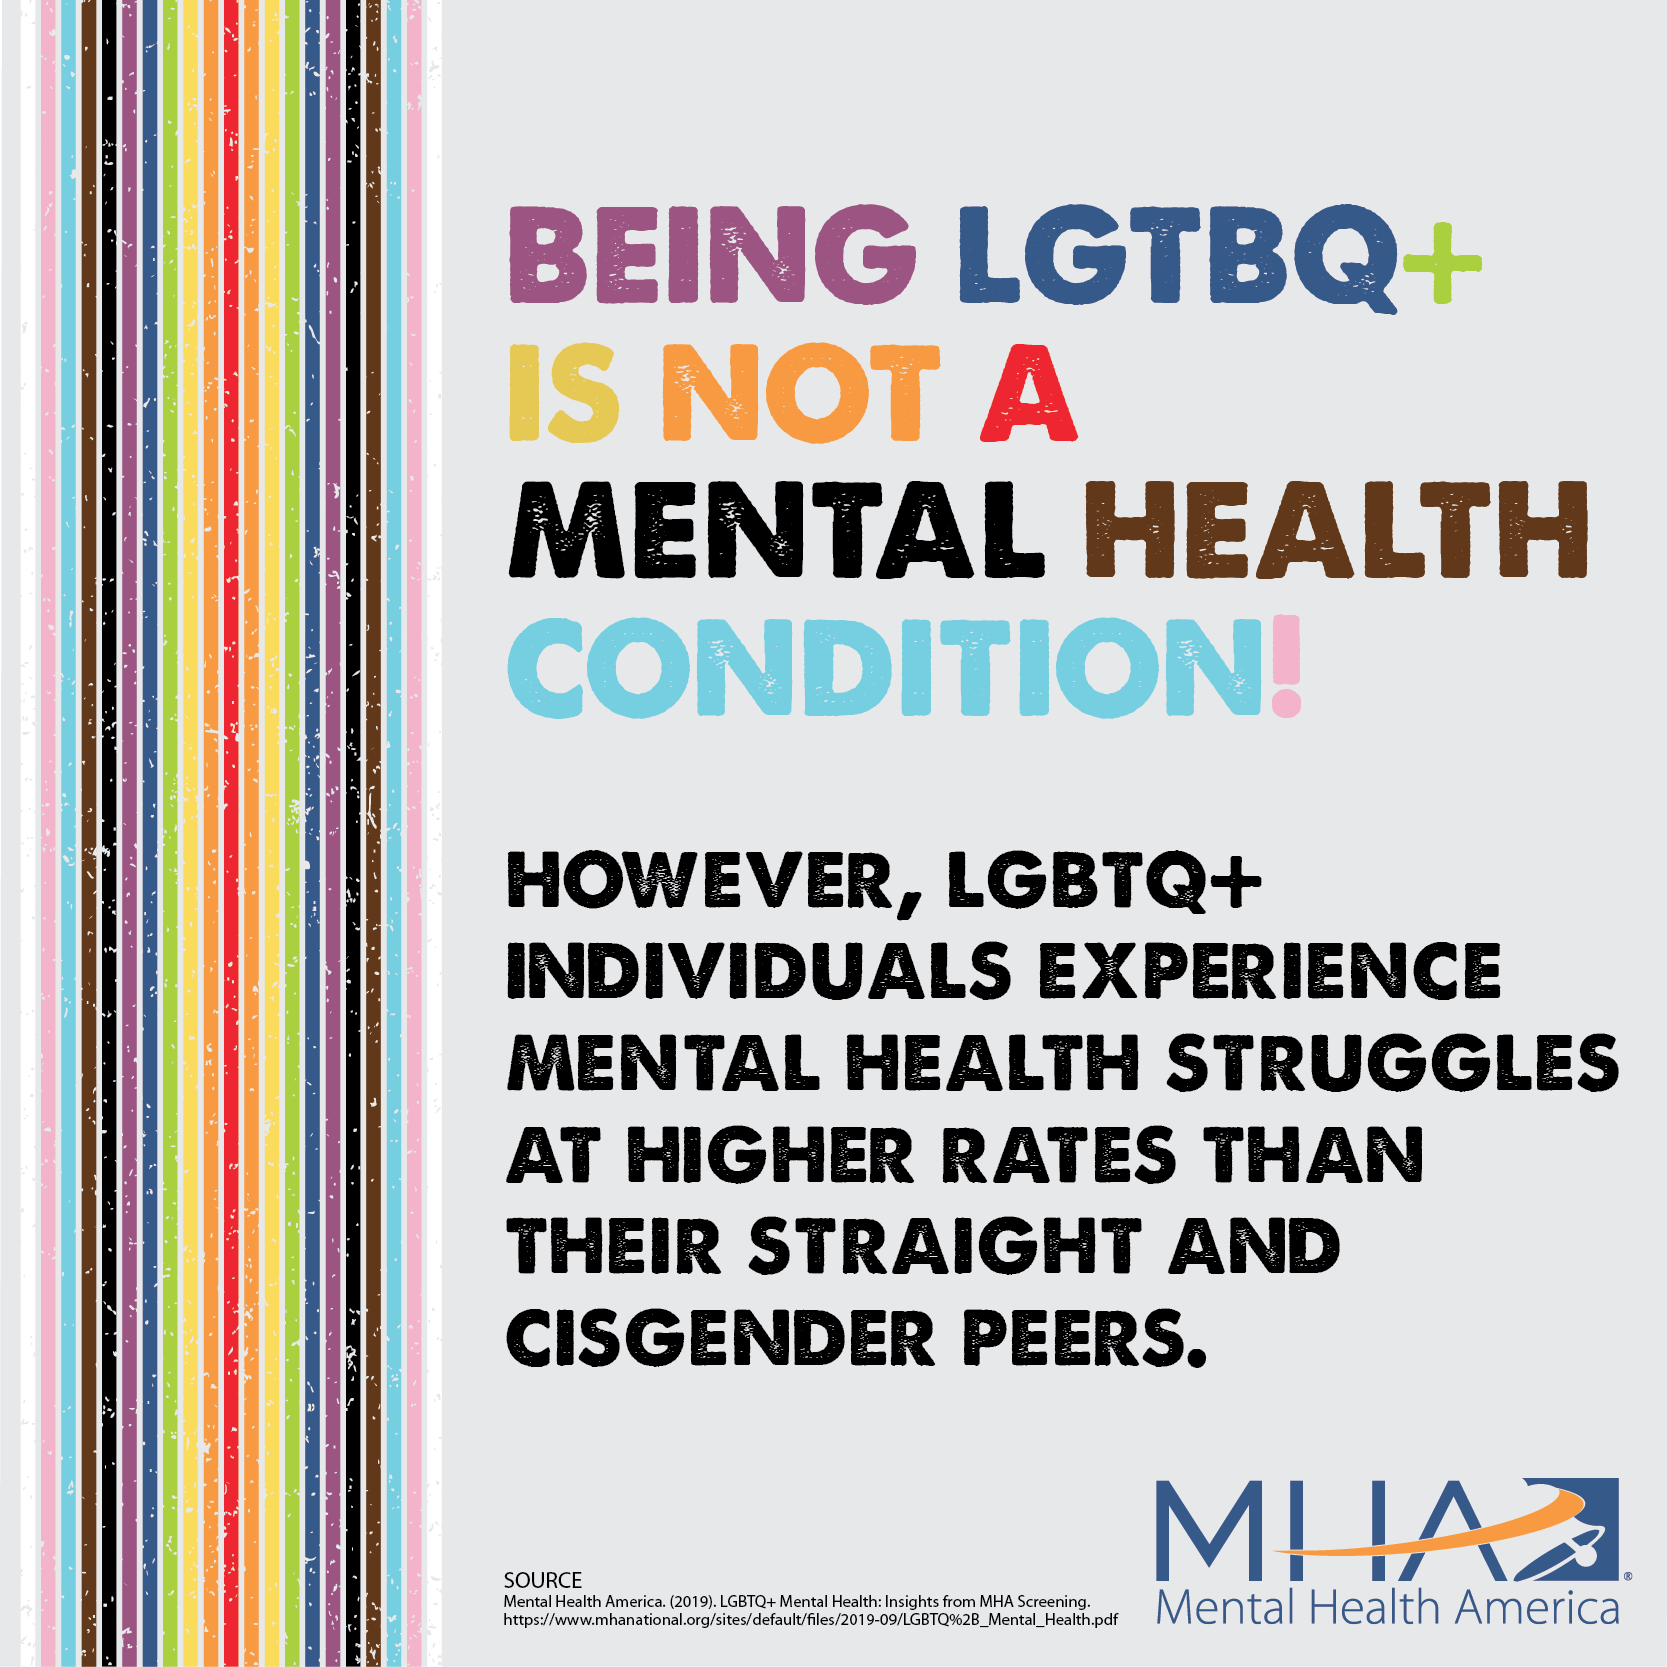 Being LGBTQ+ is not a mental health condition! However LGBTQ+ individuals experience mental health struggles at higher rates than their straight and cisgender peers.